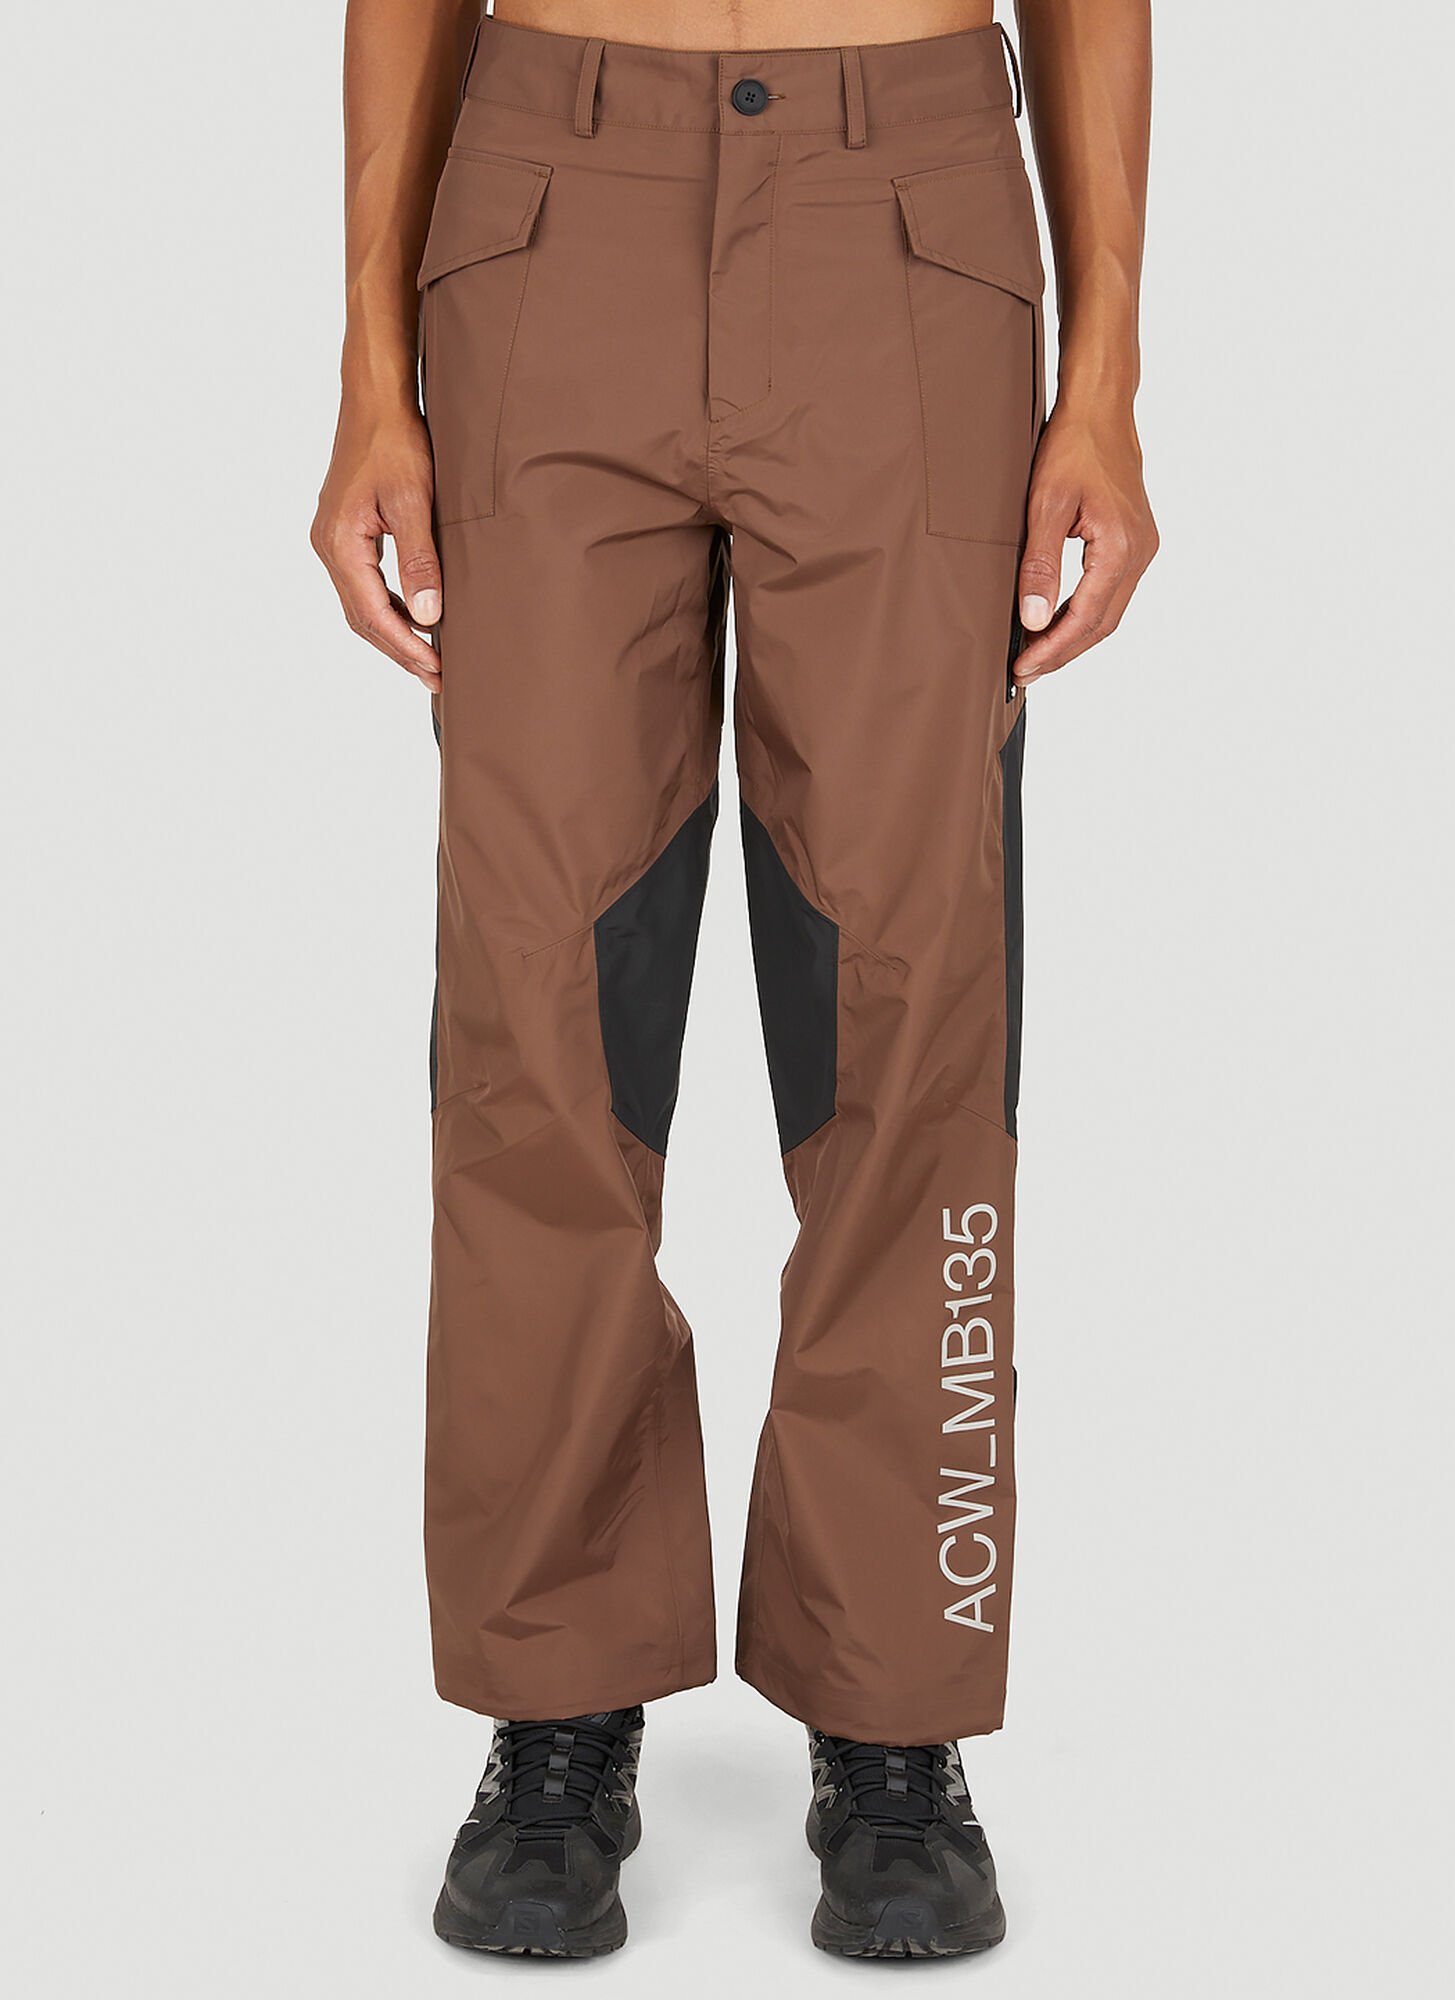 A-cold-wall* 3l Tech Trousers